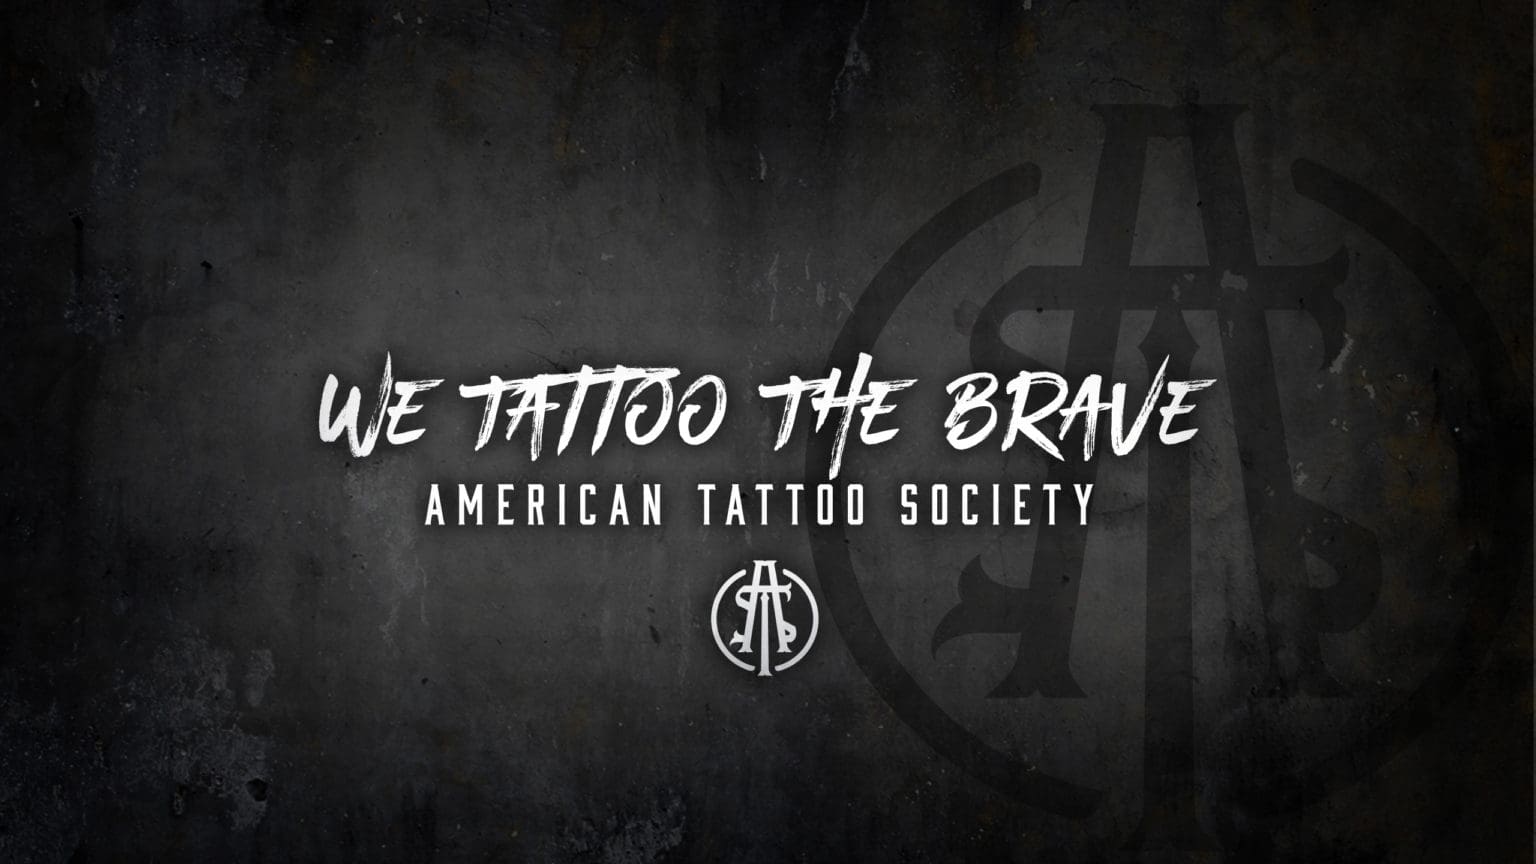 American Tattoo Society announces four new hires as they expand across